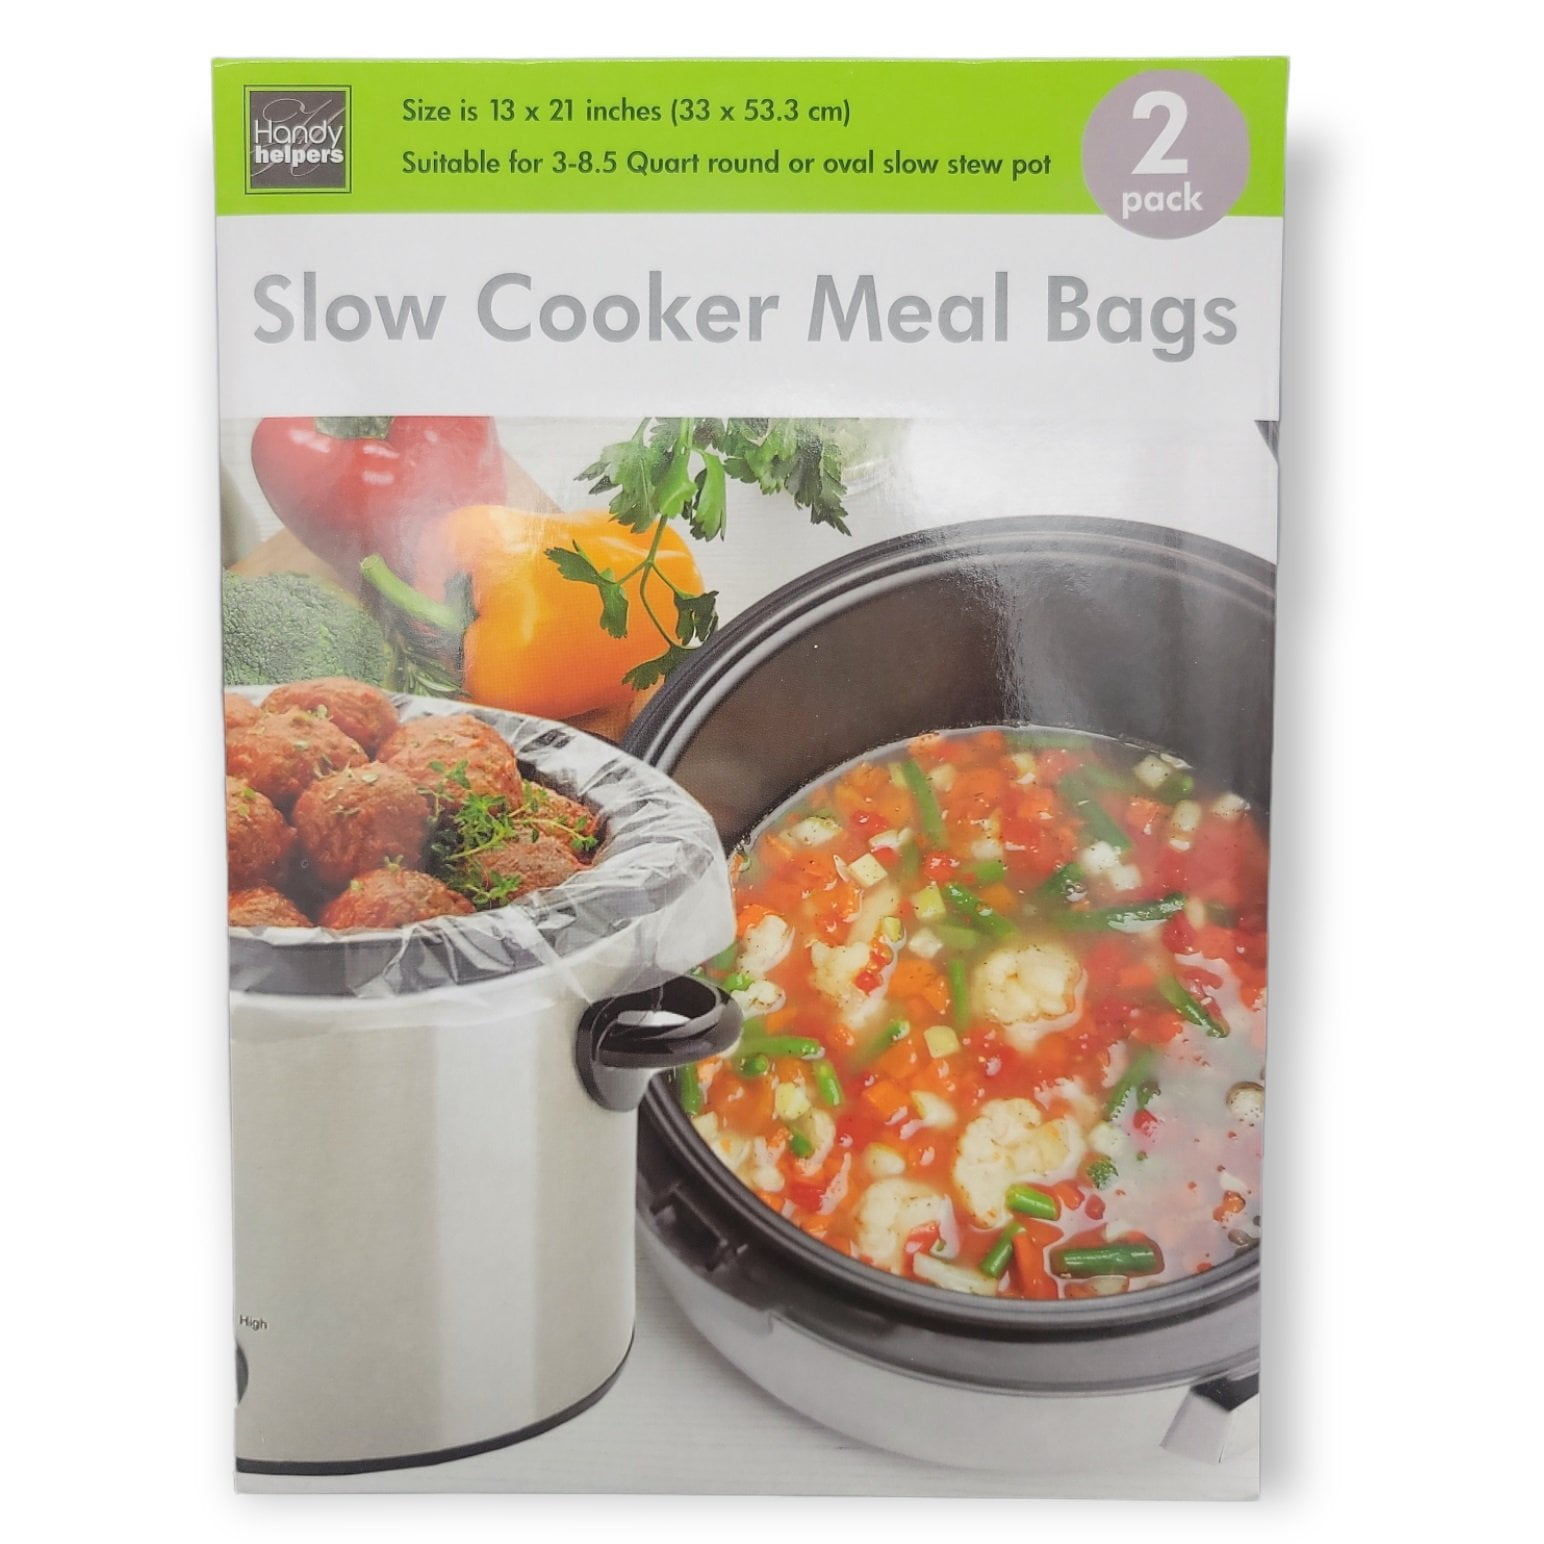  Party Bargains 30 Bags Slow Cooker Liners - Fits 7-8 Quarts, 21  x 4 x 13 Inches, 4 Wide Gusset, X-Large Crock Pot Liners, Multi Use  Cooking Bags, Sous Vide: Home & Kitchen